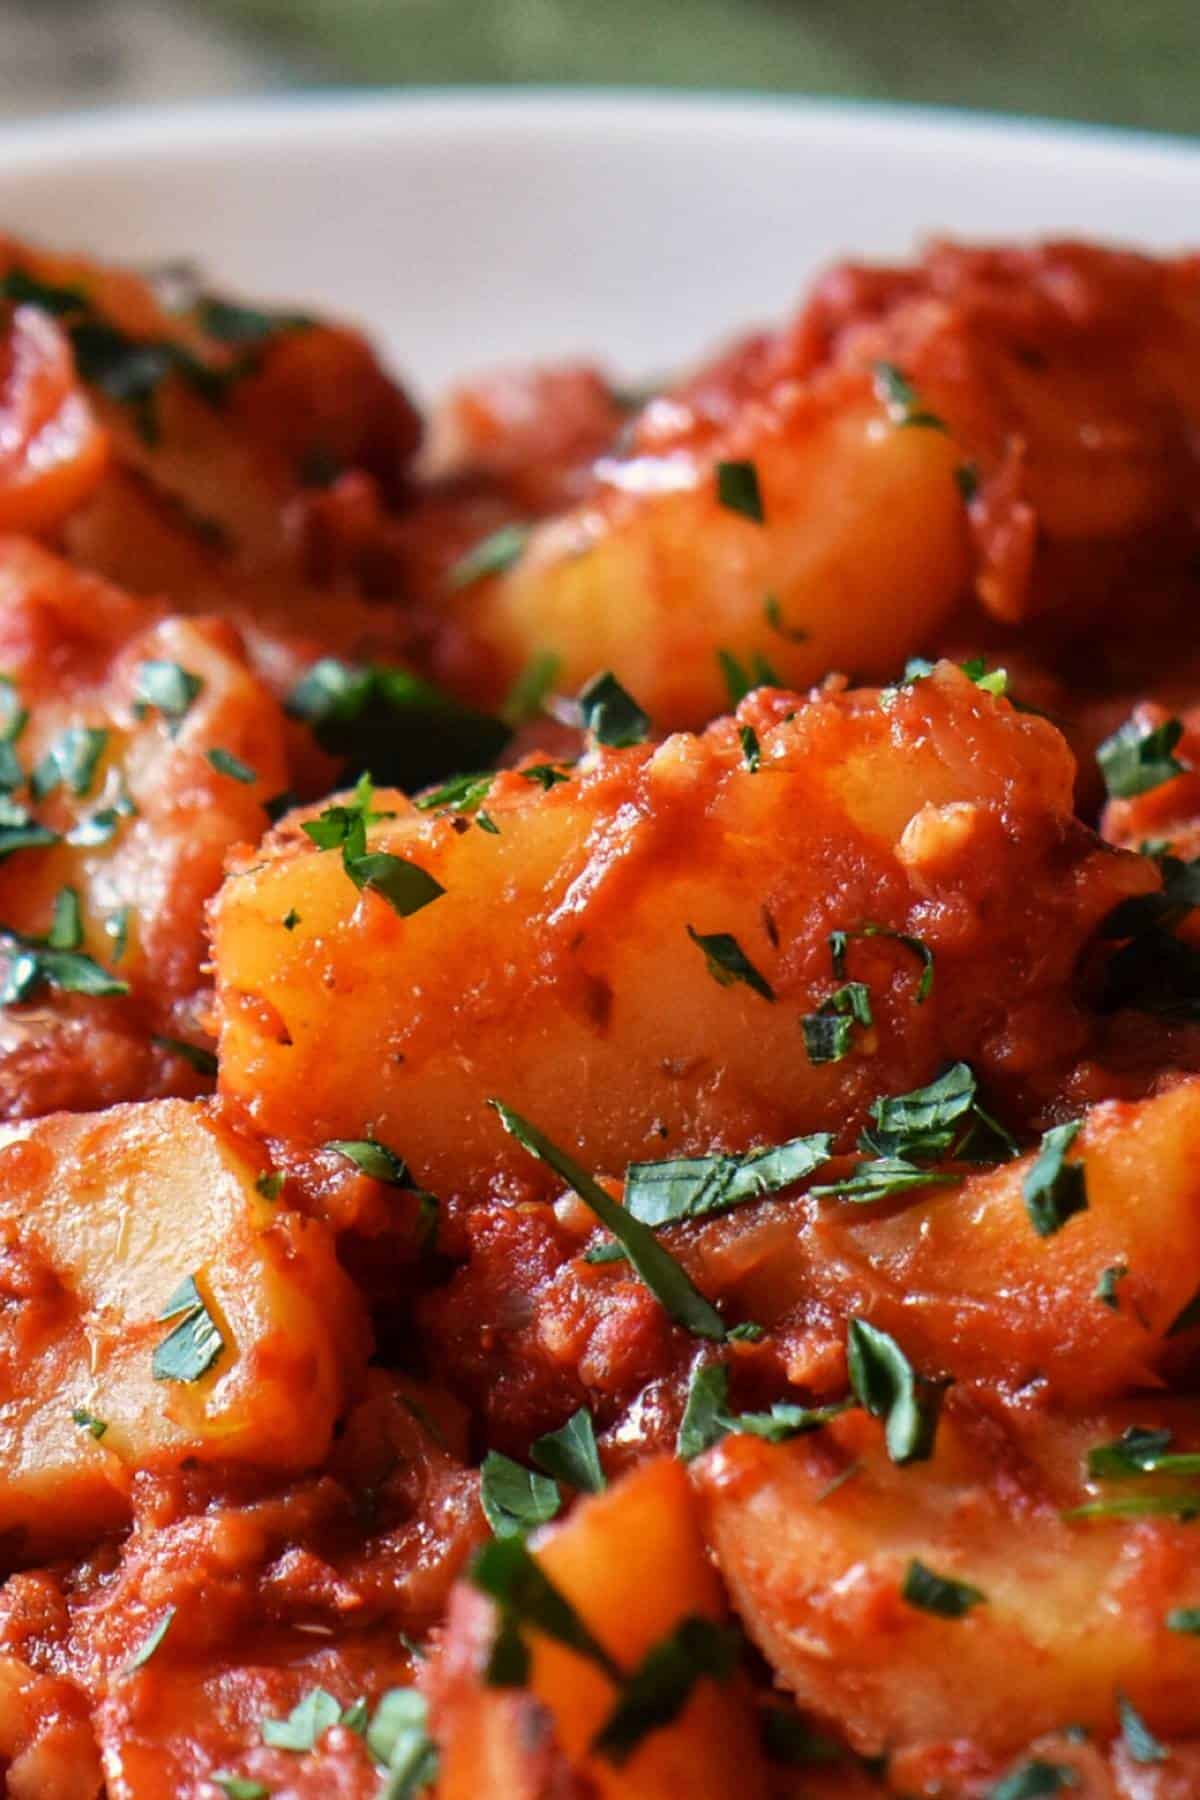 Potato wedges smothered with tomato sauce and herbs.